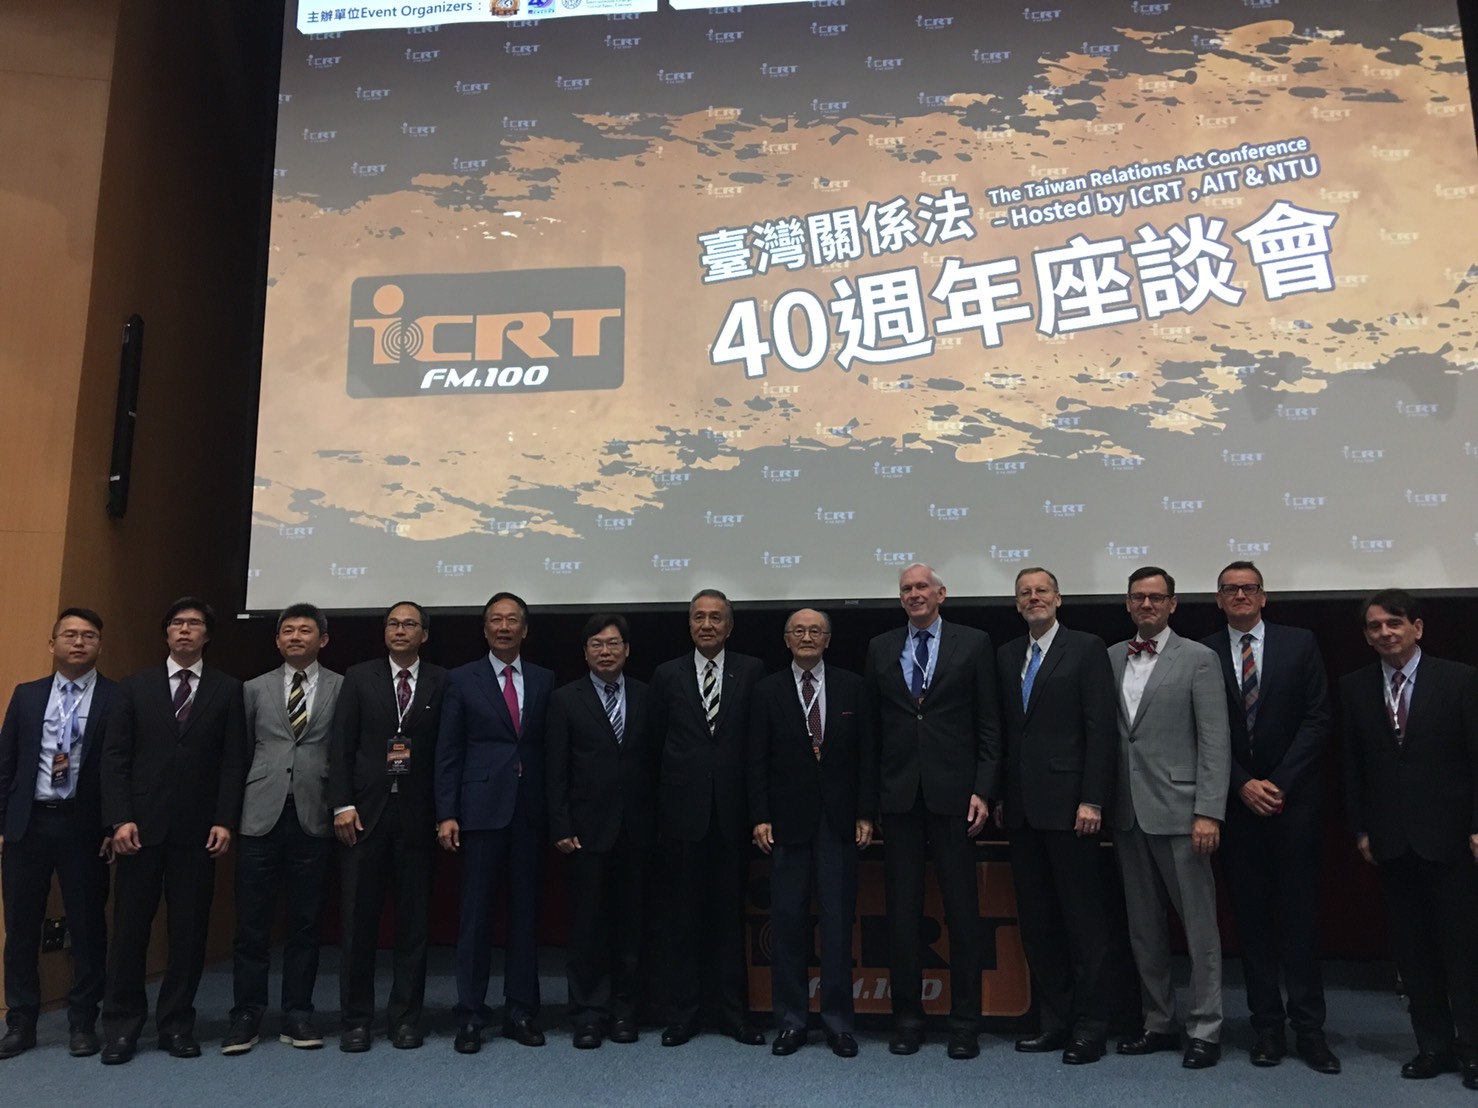 Remarks by AIT Director W. Brent Christensen at the conference on “Taiwan Relations Act @ 40 – Where We’ve Been, and What’s Next?” on April 15, 2019